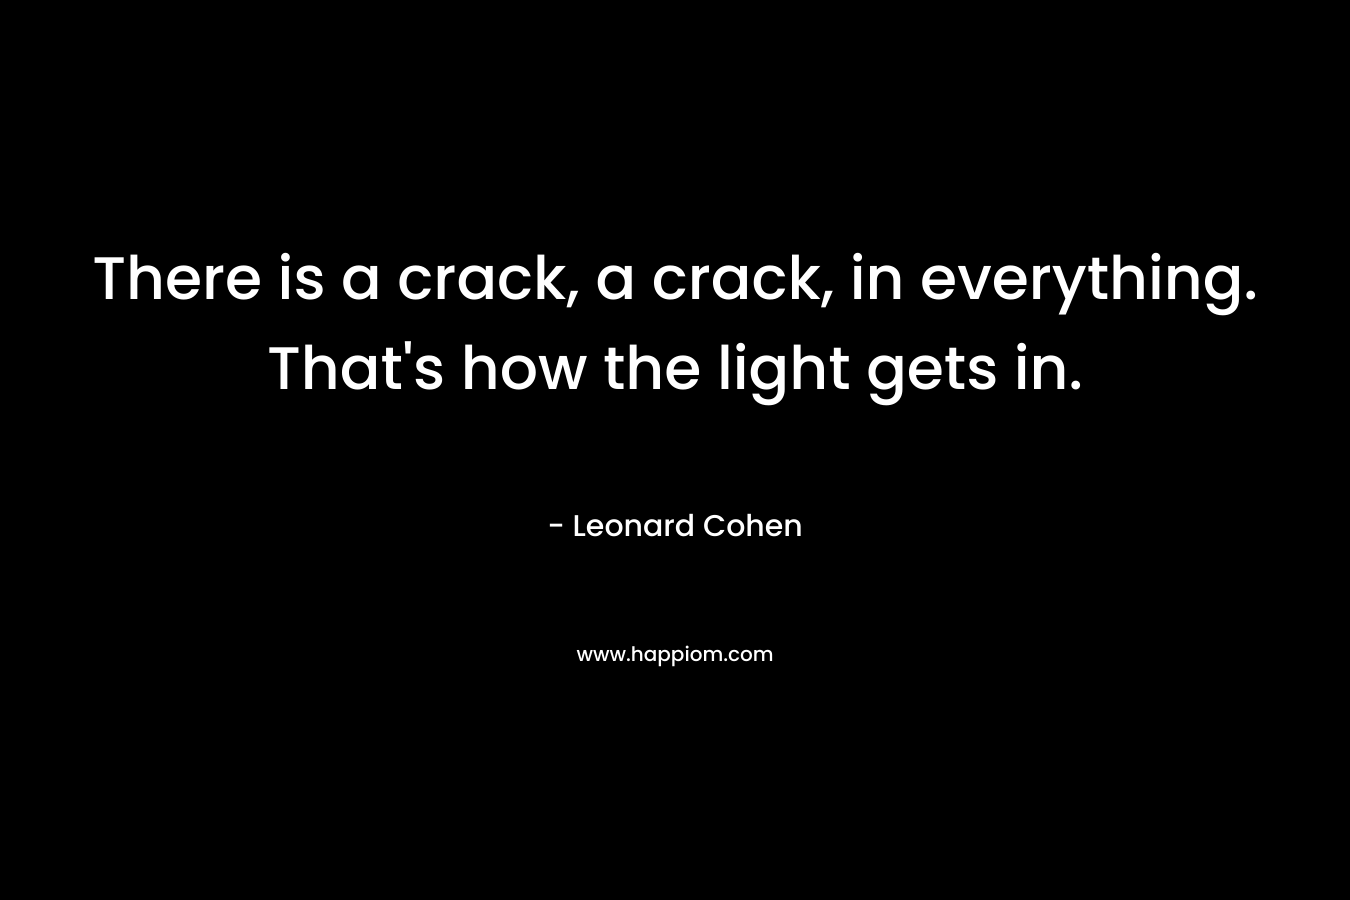 There is a crack, a crack, in everything. That's how the light gets in.